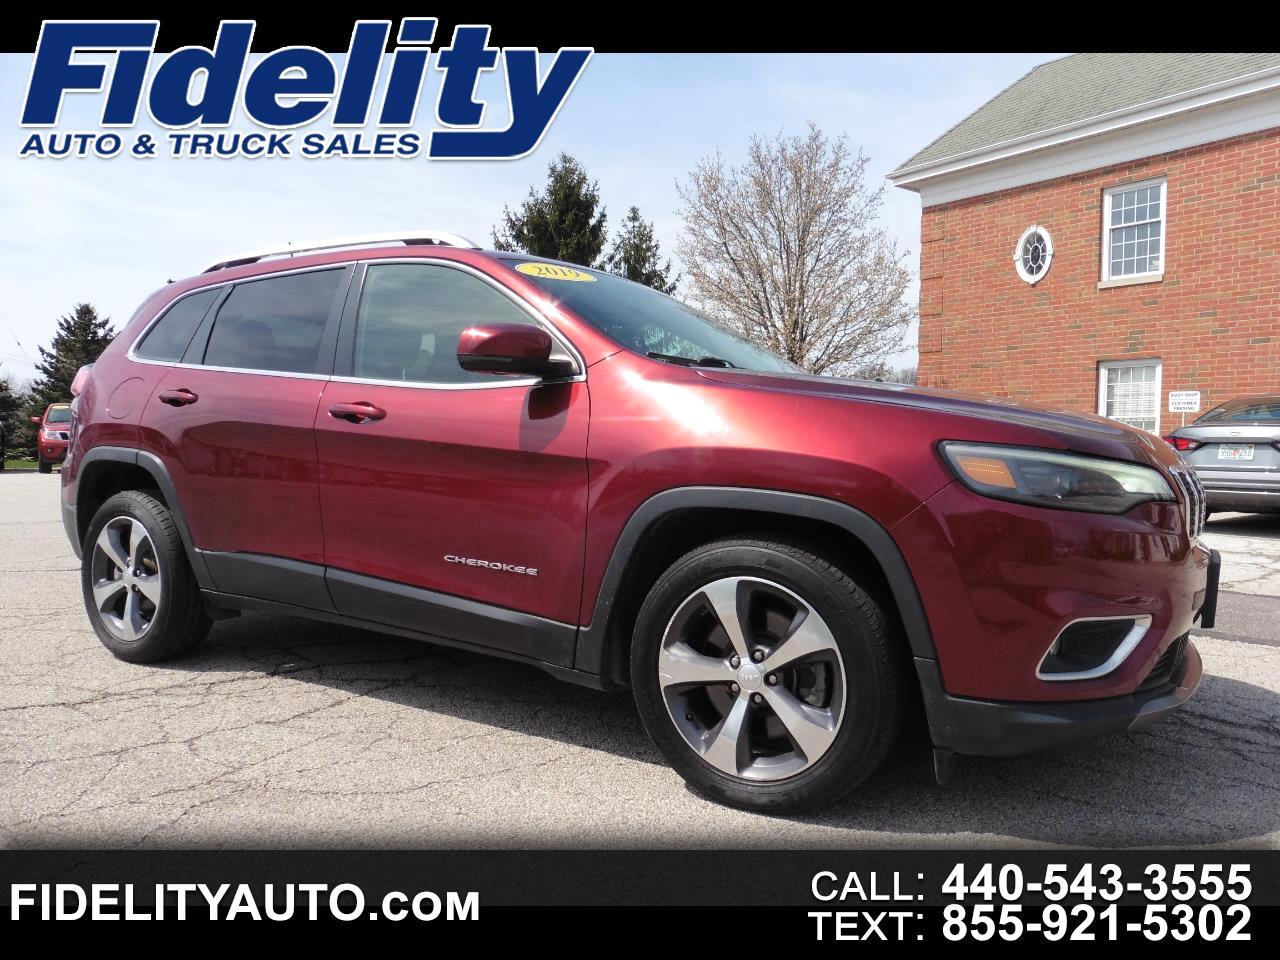 2019 Jeep Cherokee 4dr Limited